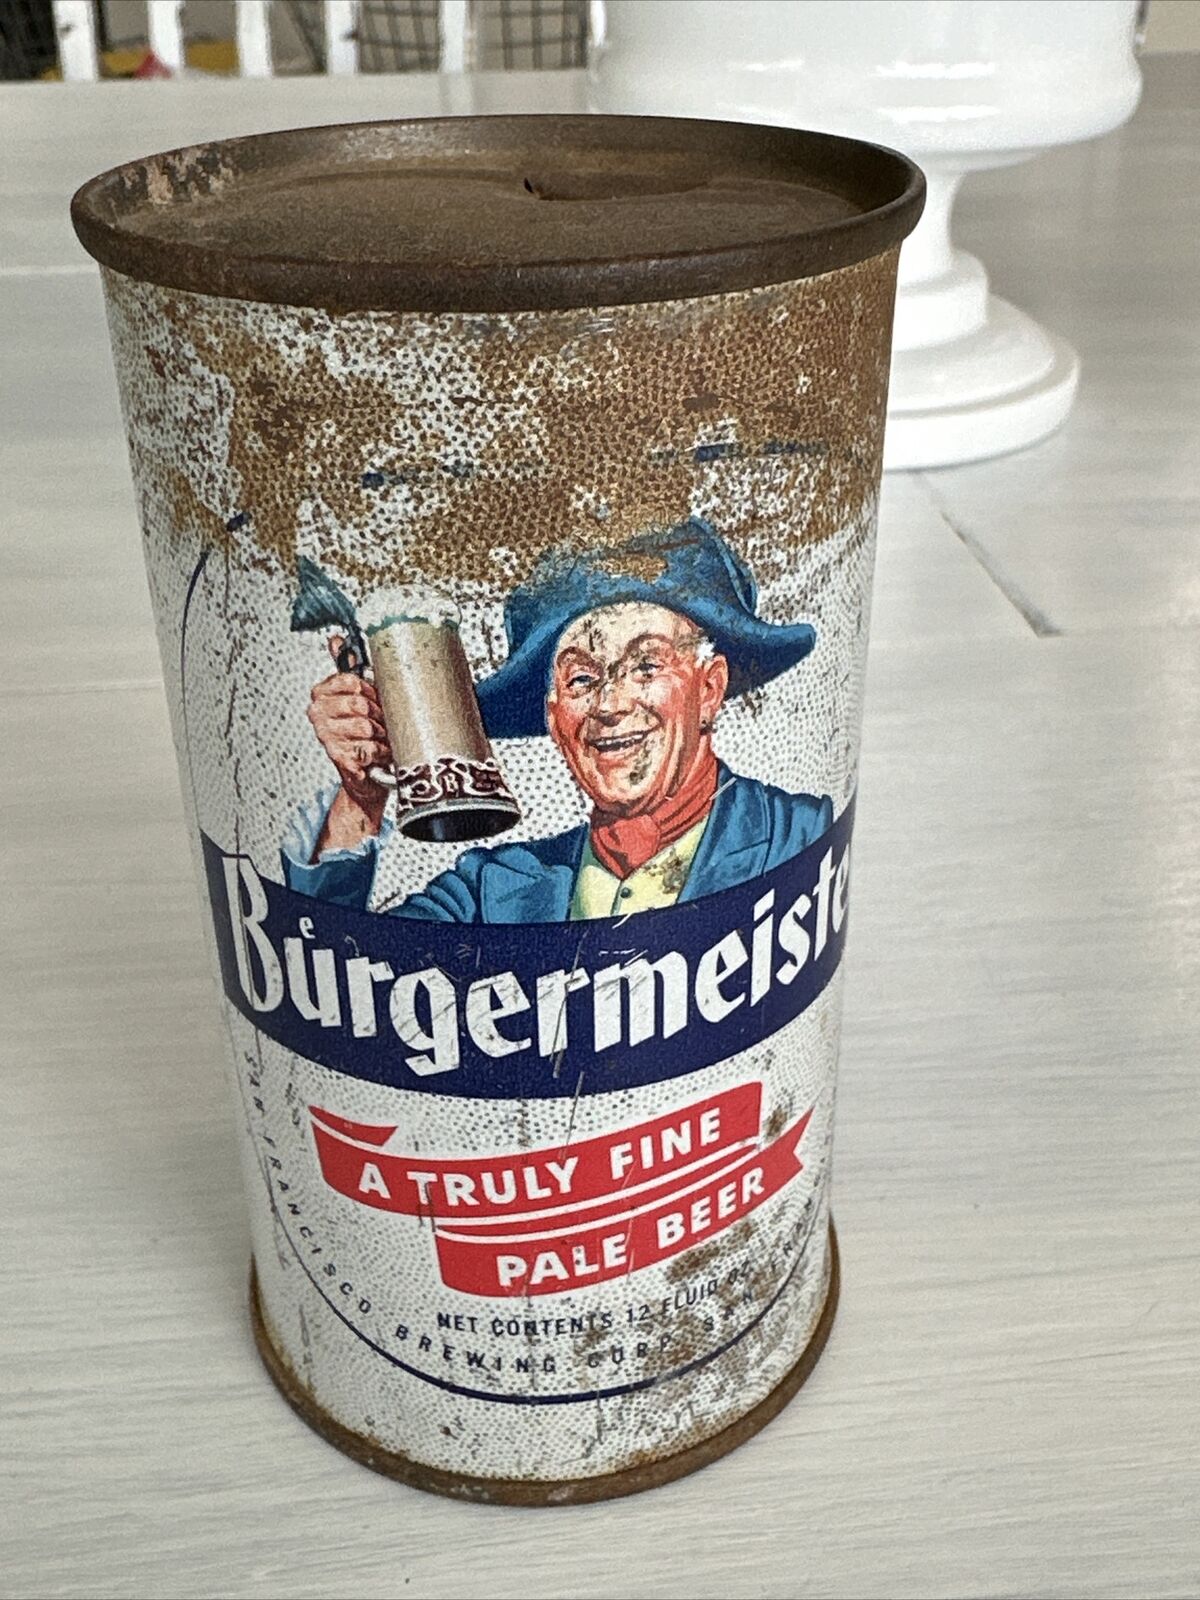 Antique Burgermeister flat top beer can  Pale Ale